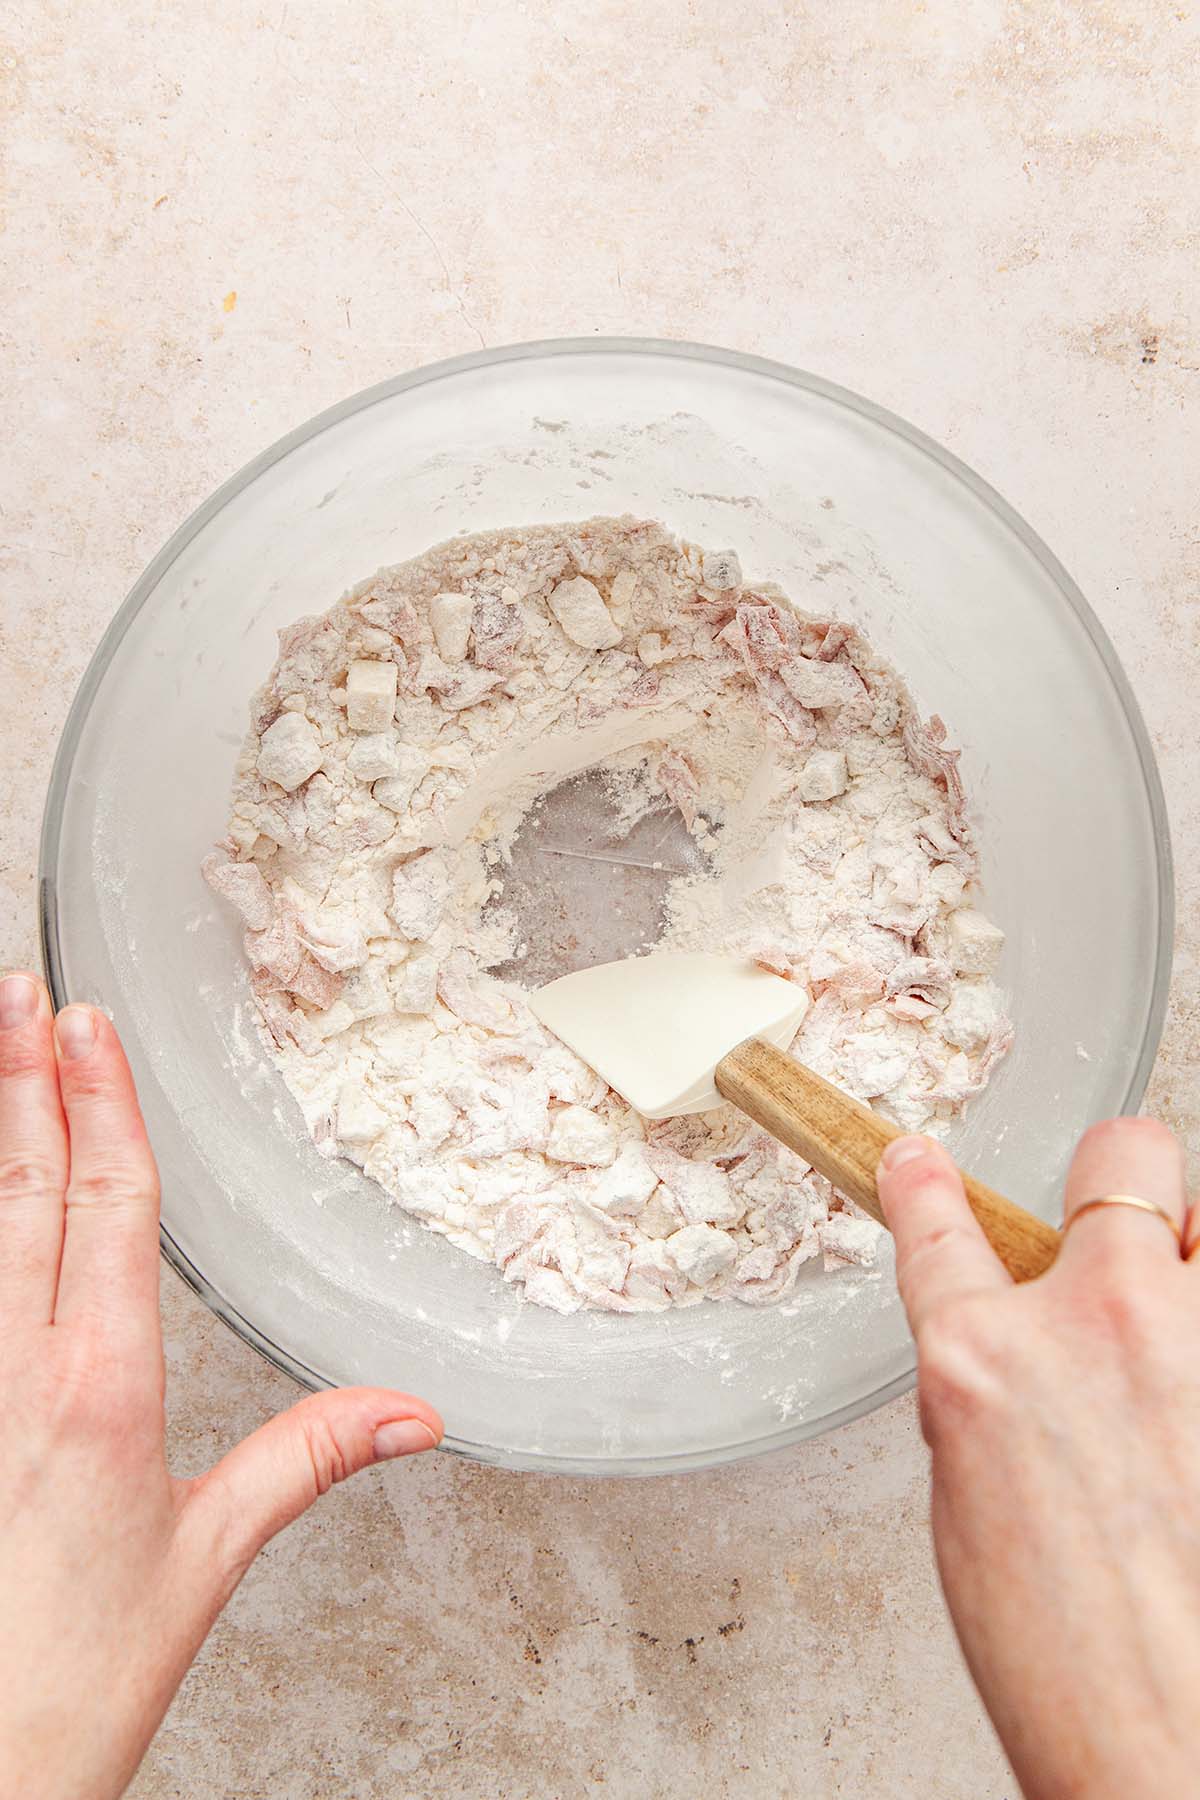 A hand using a rubber spatula to make a well in the middle of a bowl of dry ingredients.